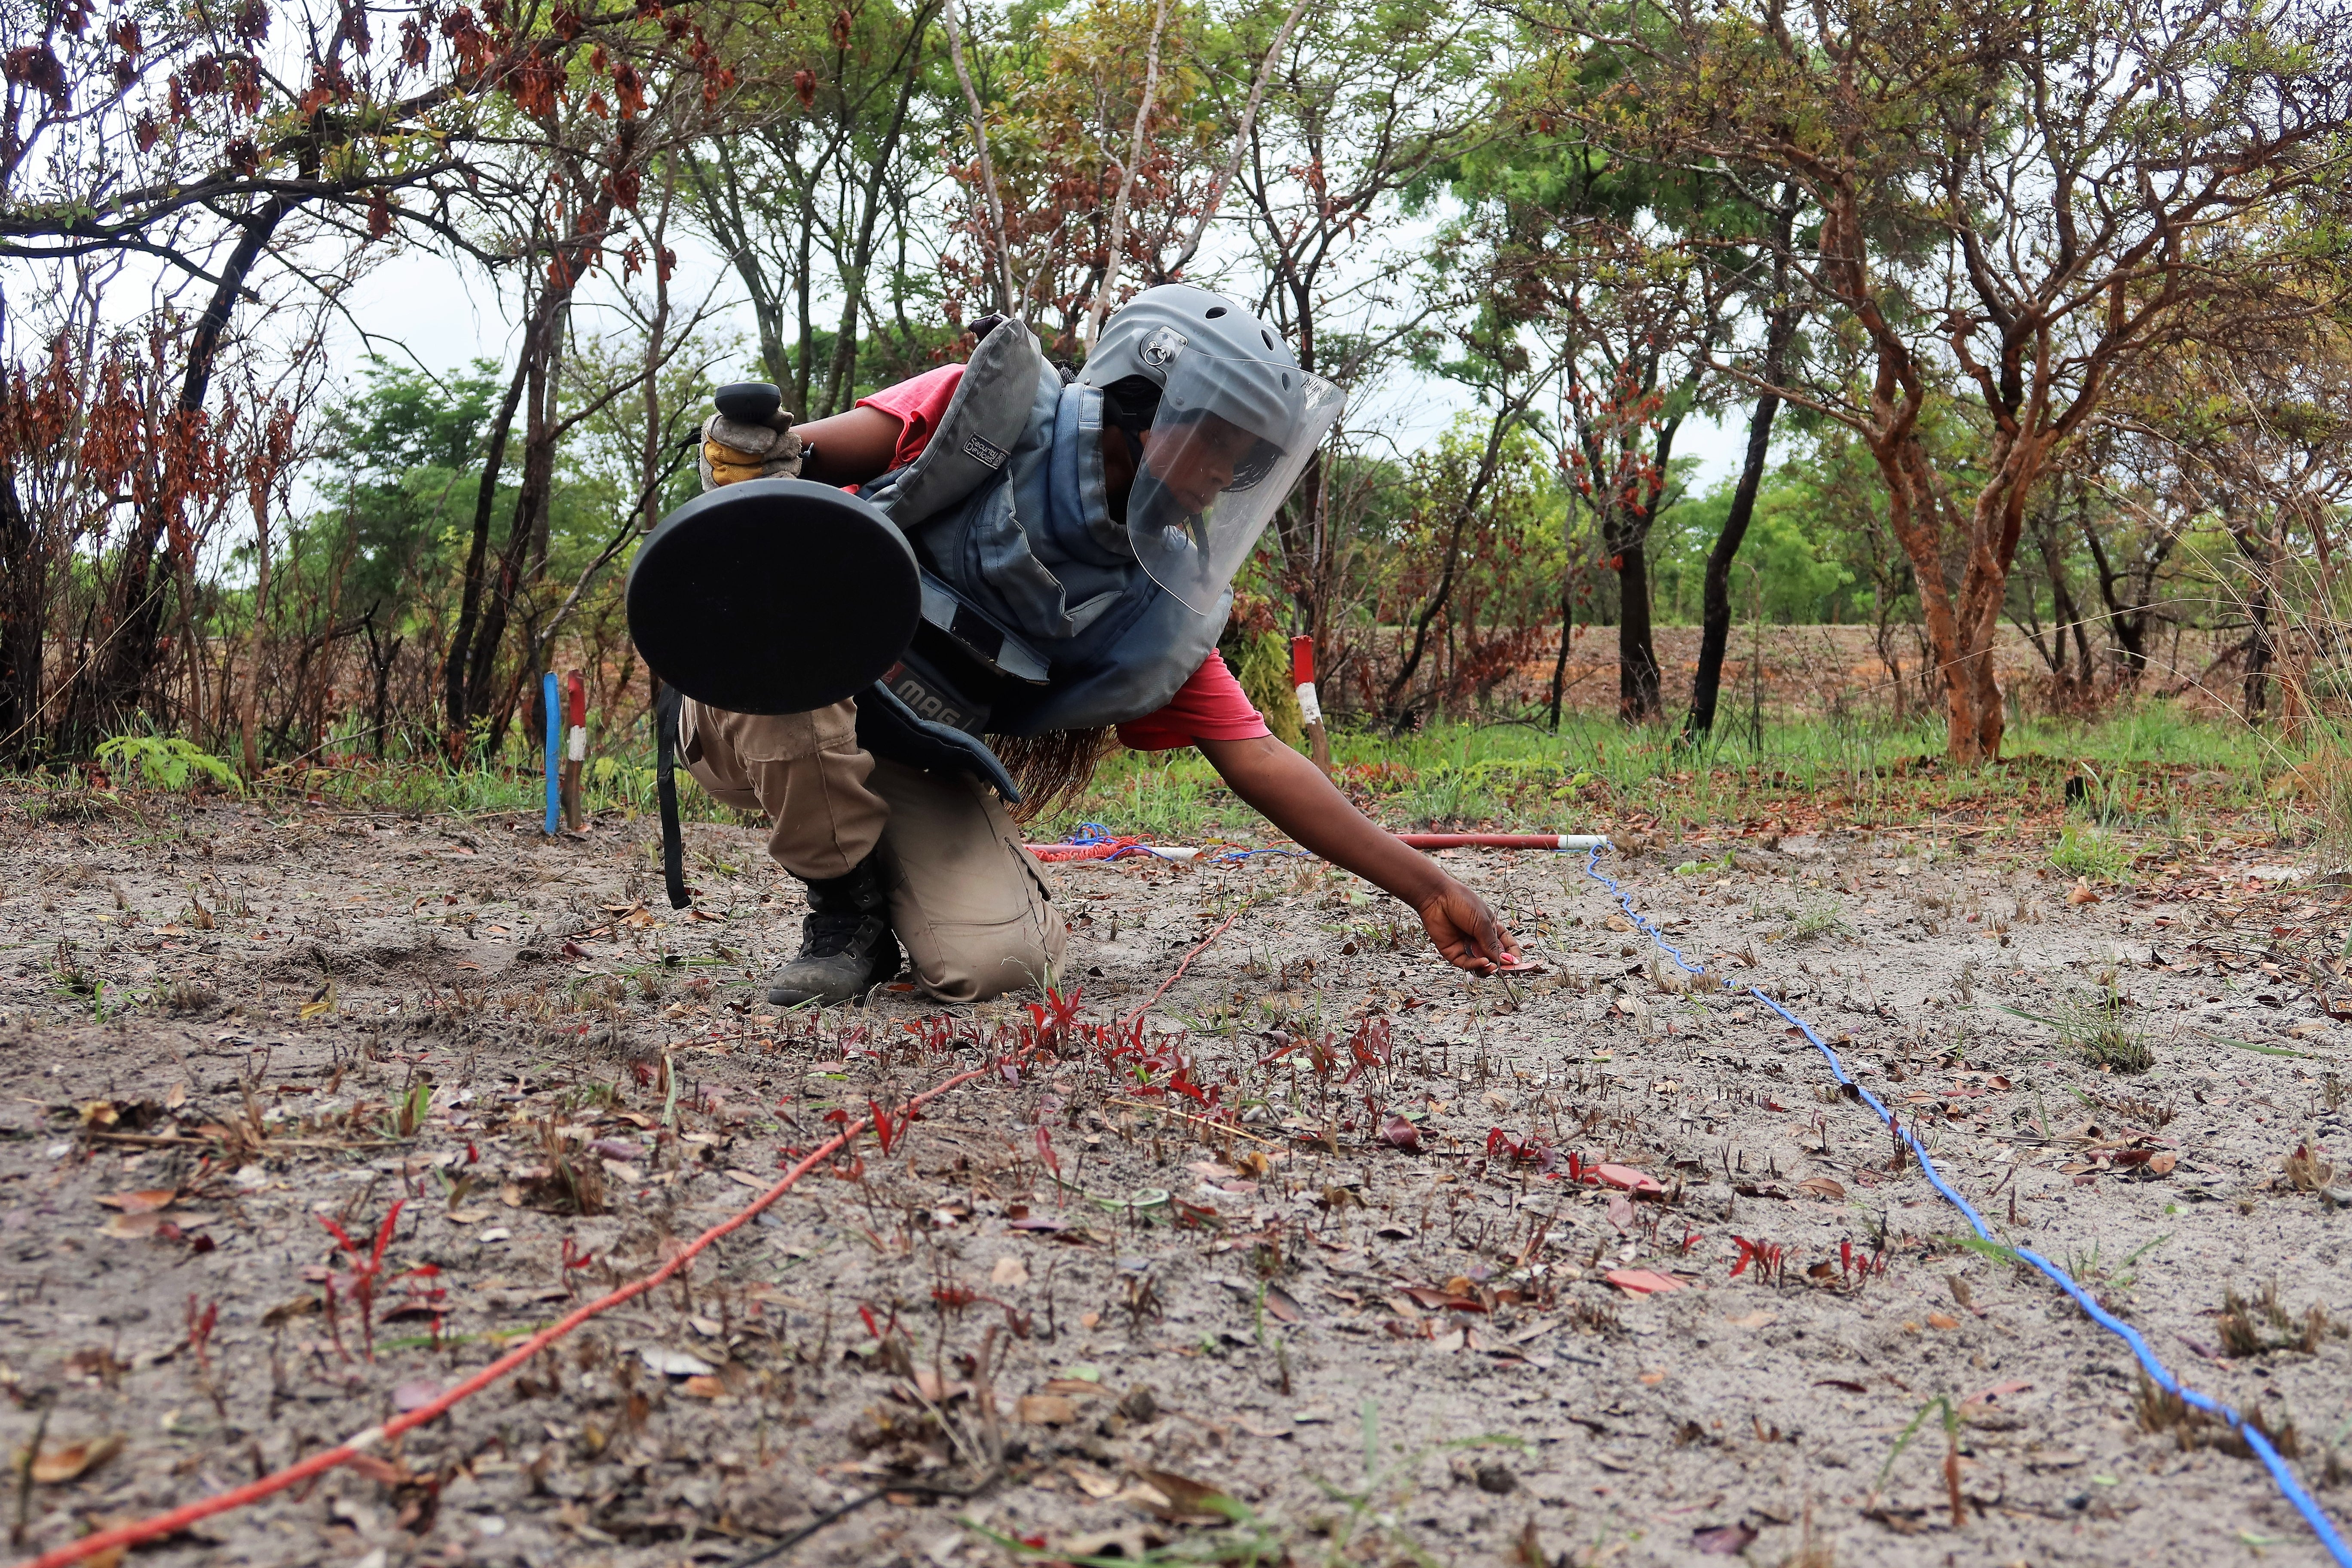 A MAG deminer in Angola searches for unexploded ordinance